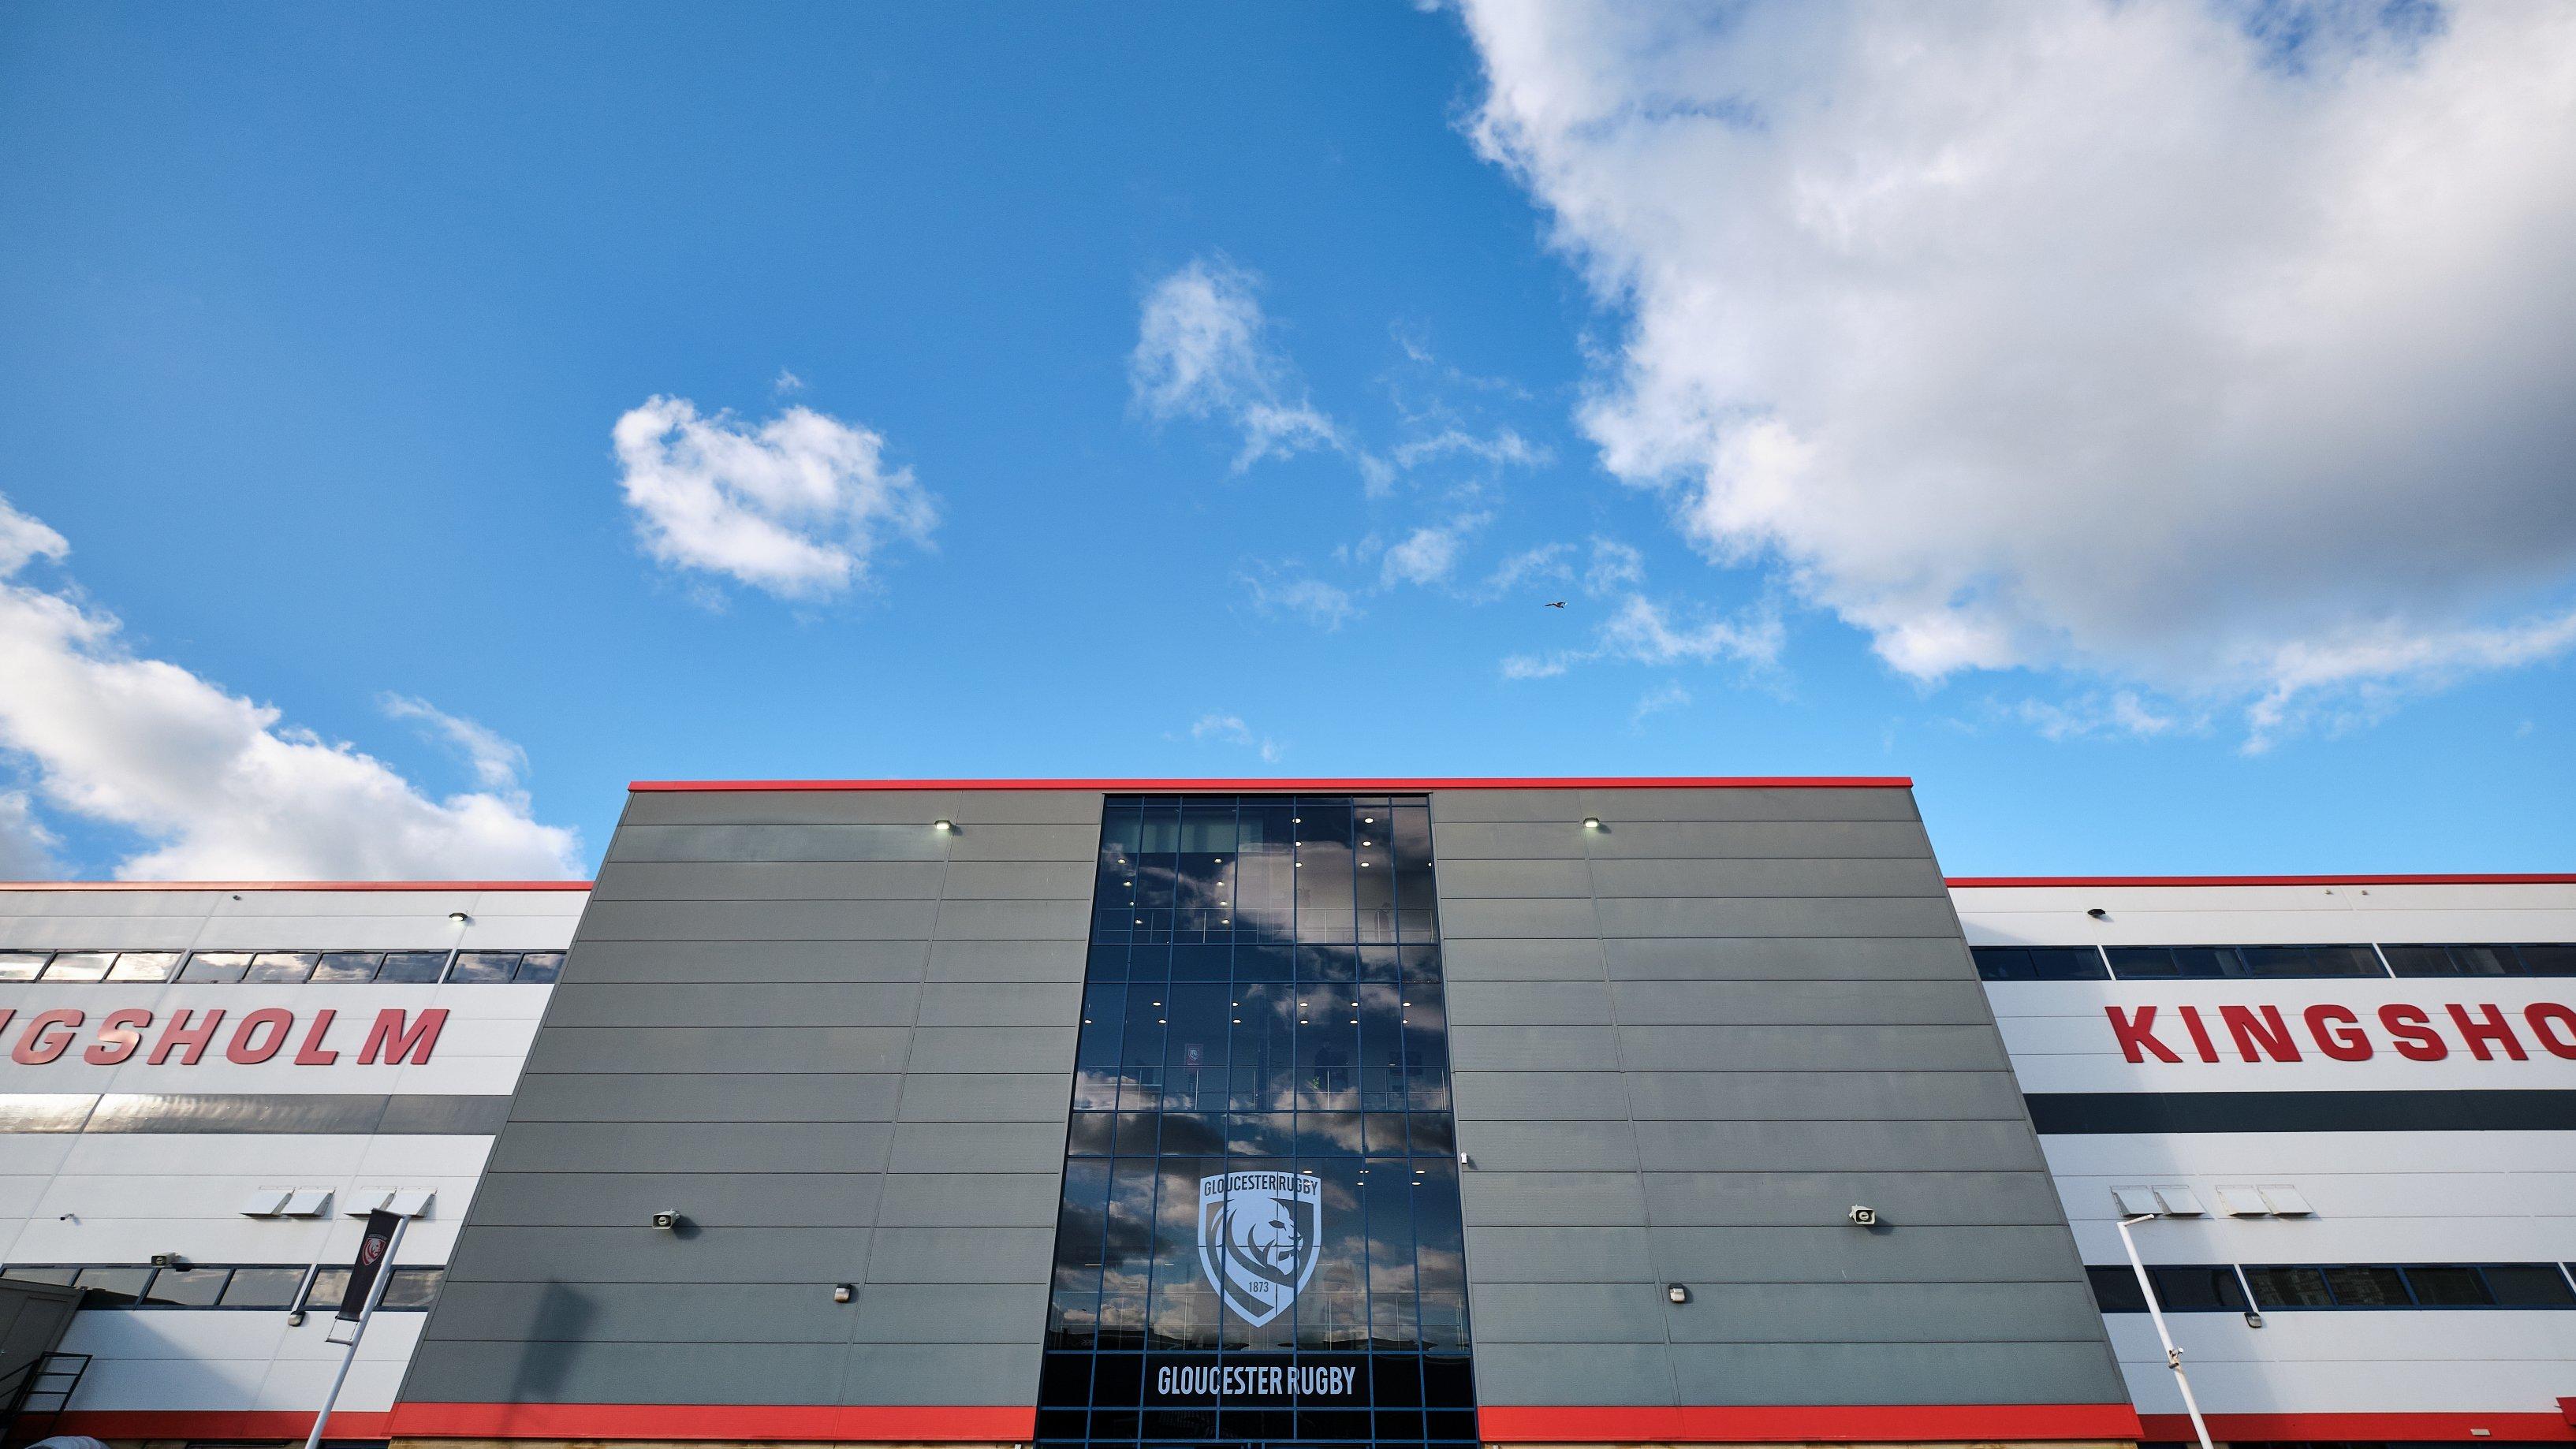 Gloucester Rugby Club: Kingsholm Stadium, The Heritage photo #3